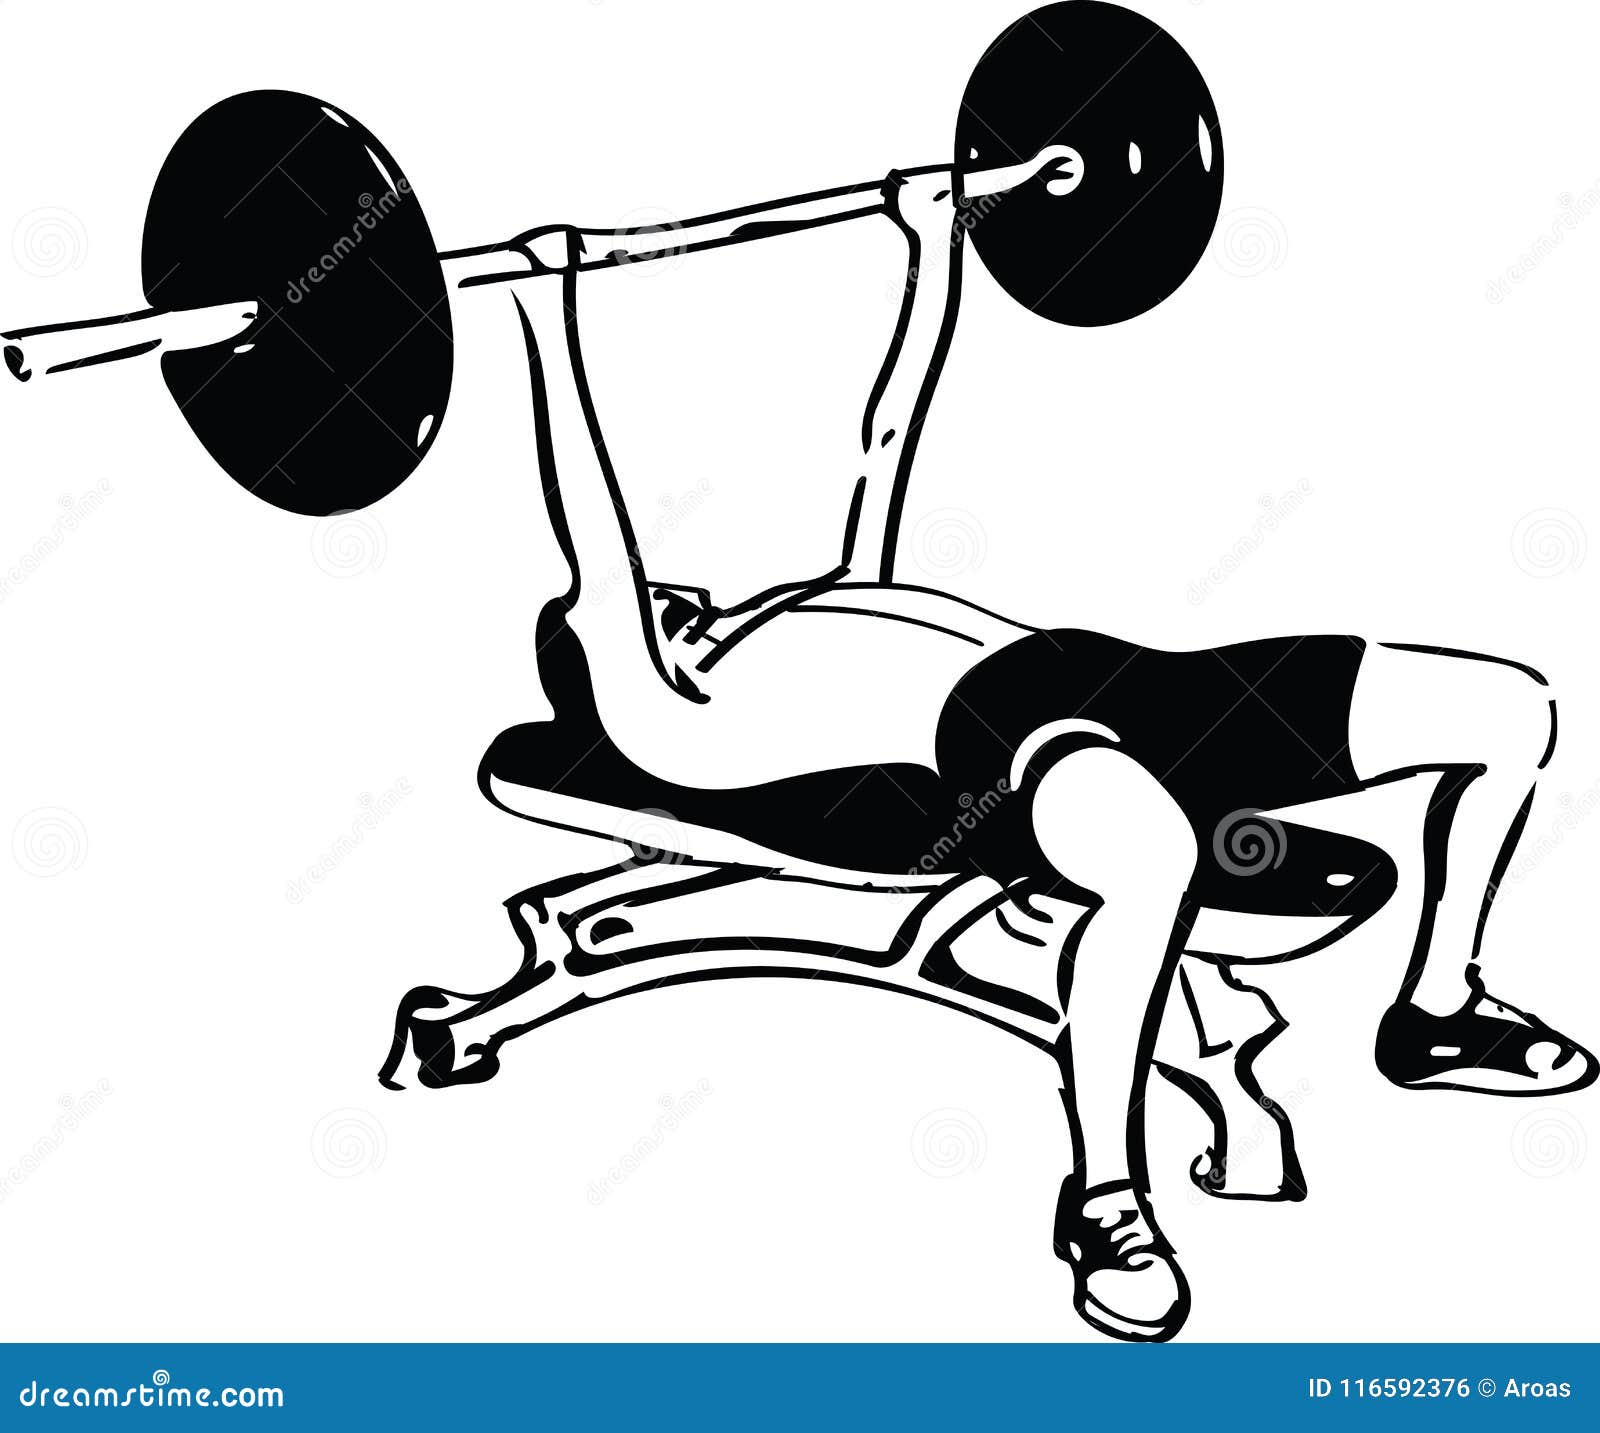 Man with Barbell Doing Squats in Gym Stock Vector - Illustration of ...